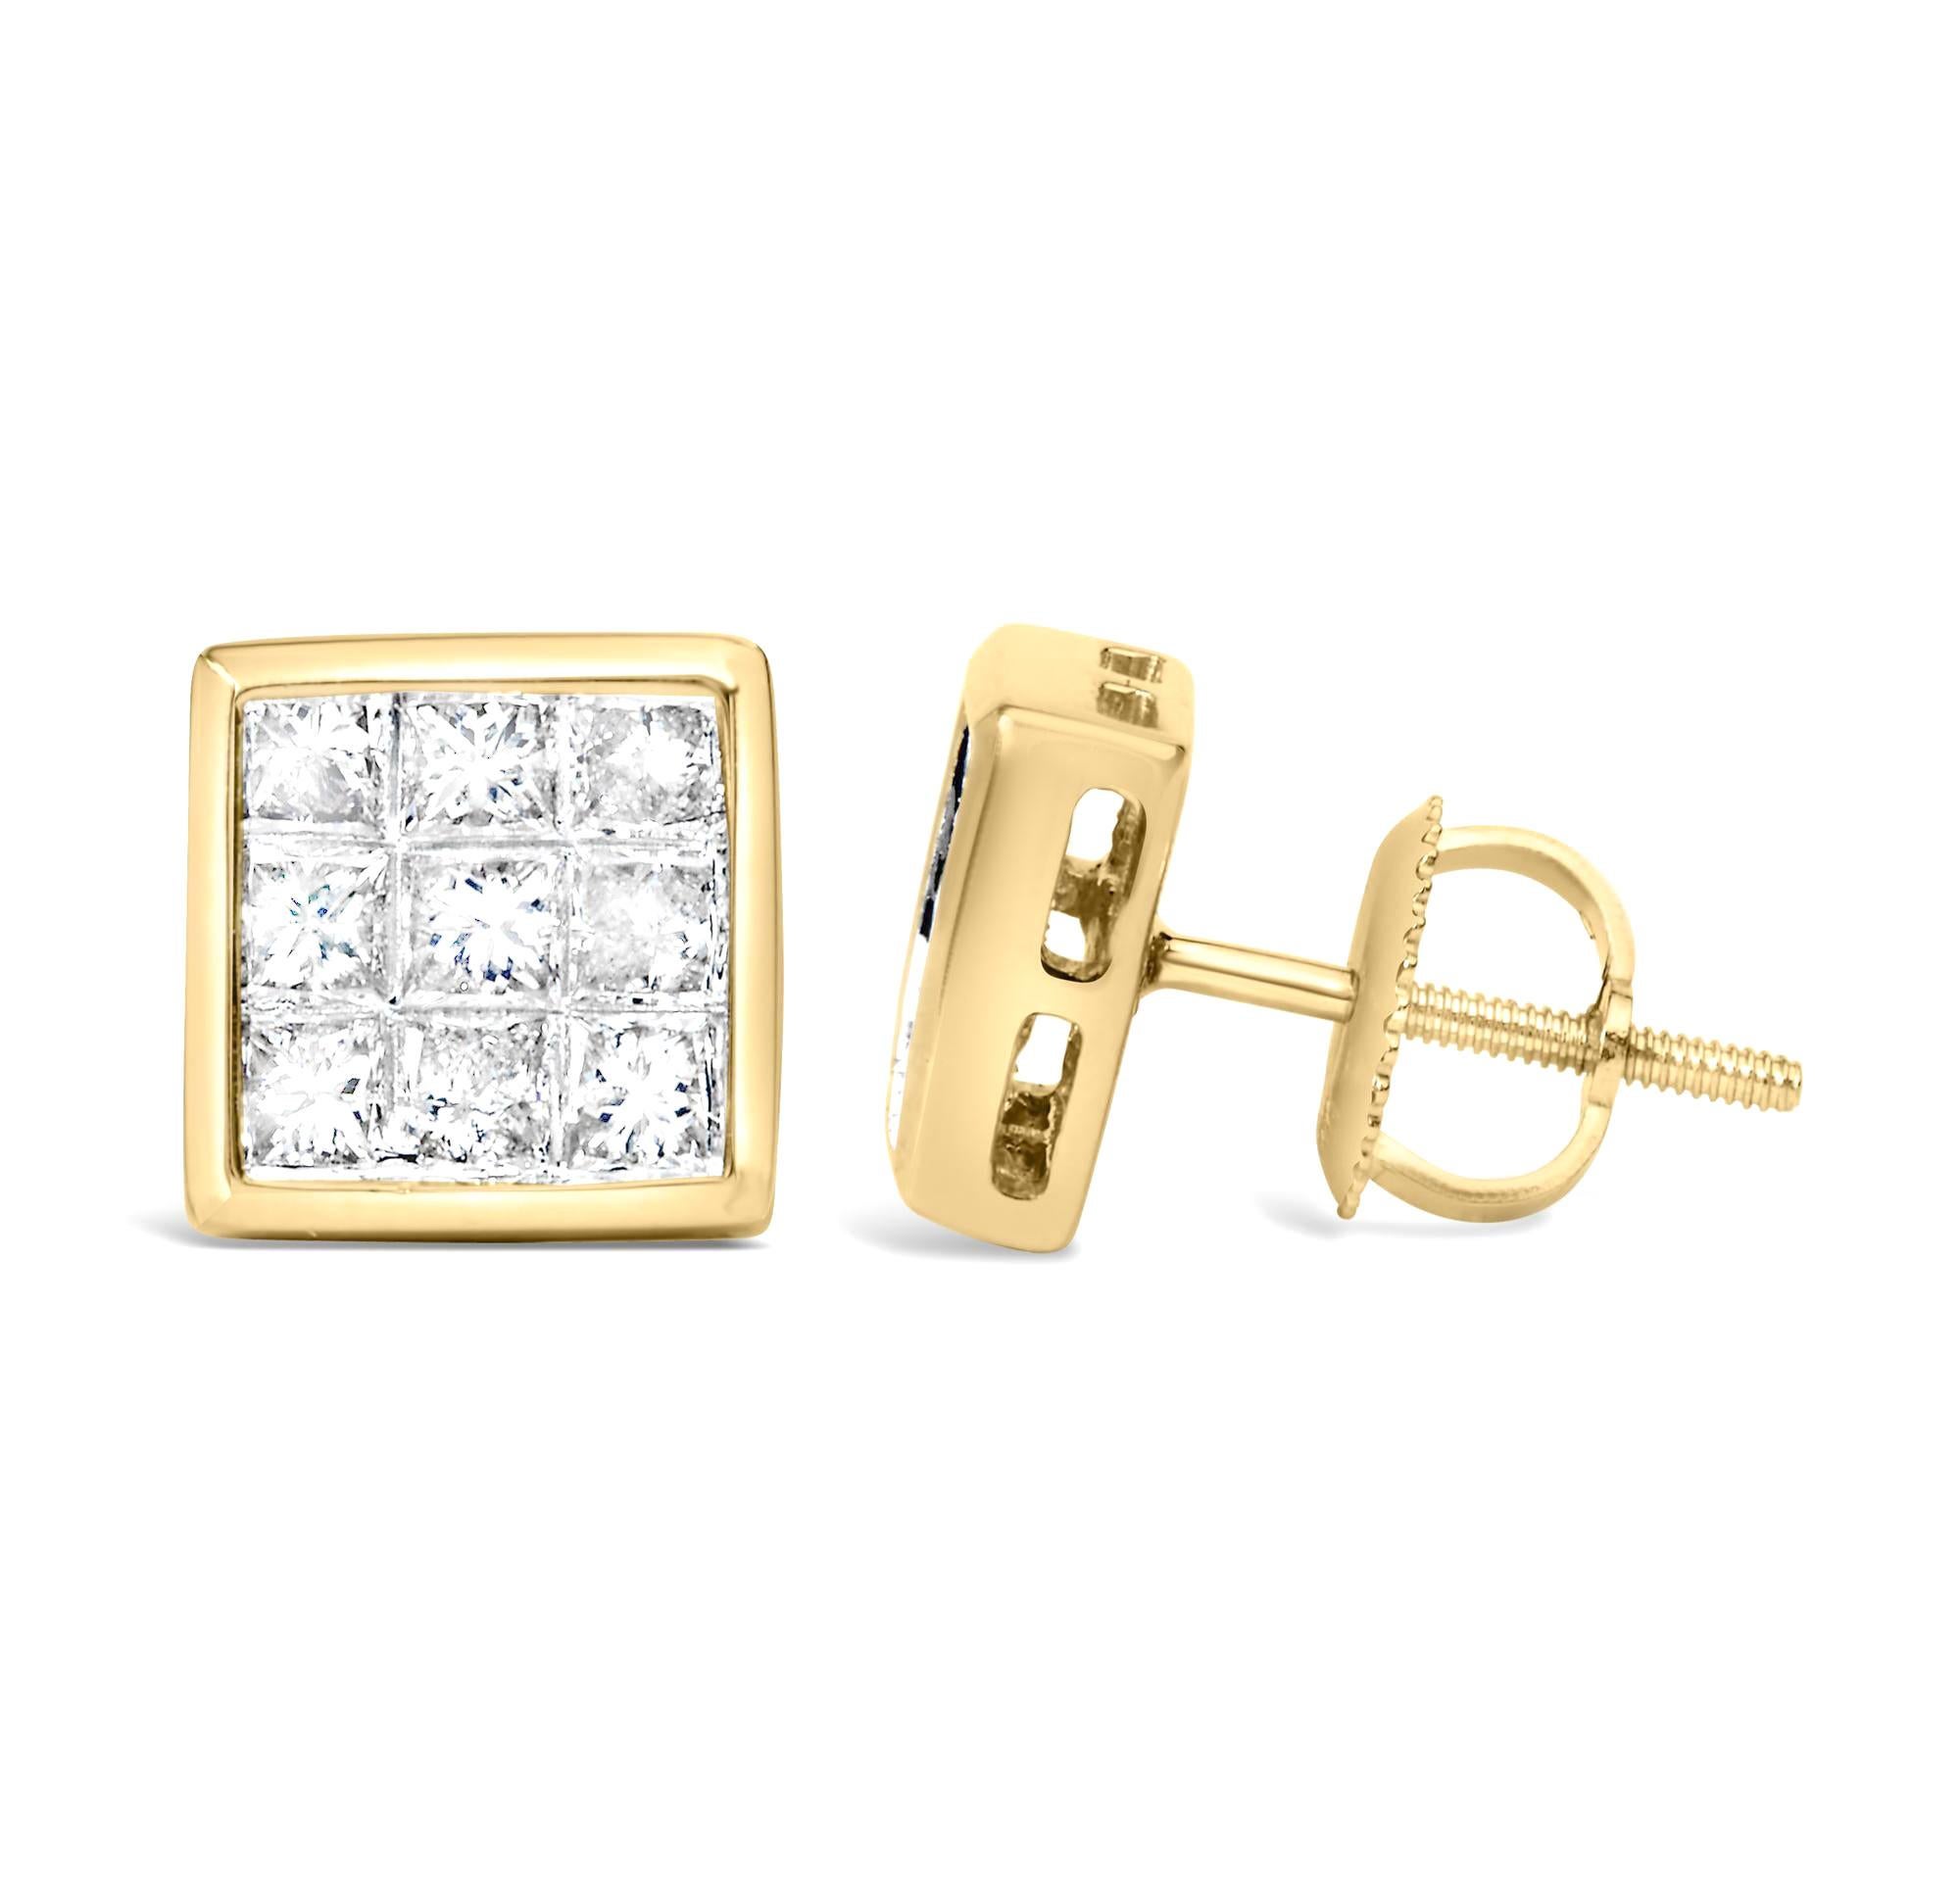 Square Stud Earrings Illusion Set Diamonds Princess Cut 14K Yellow Gold In Excellent Condition For Sale In Laguna Niguel, CA